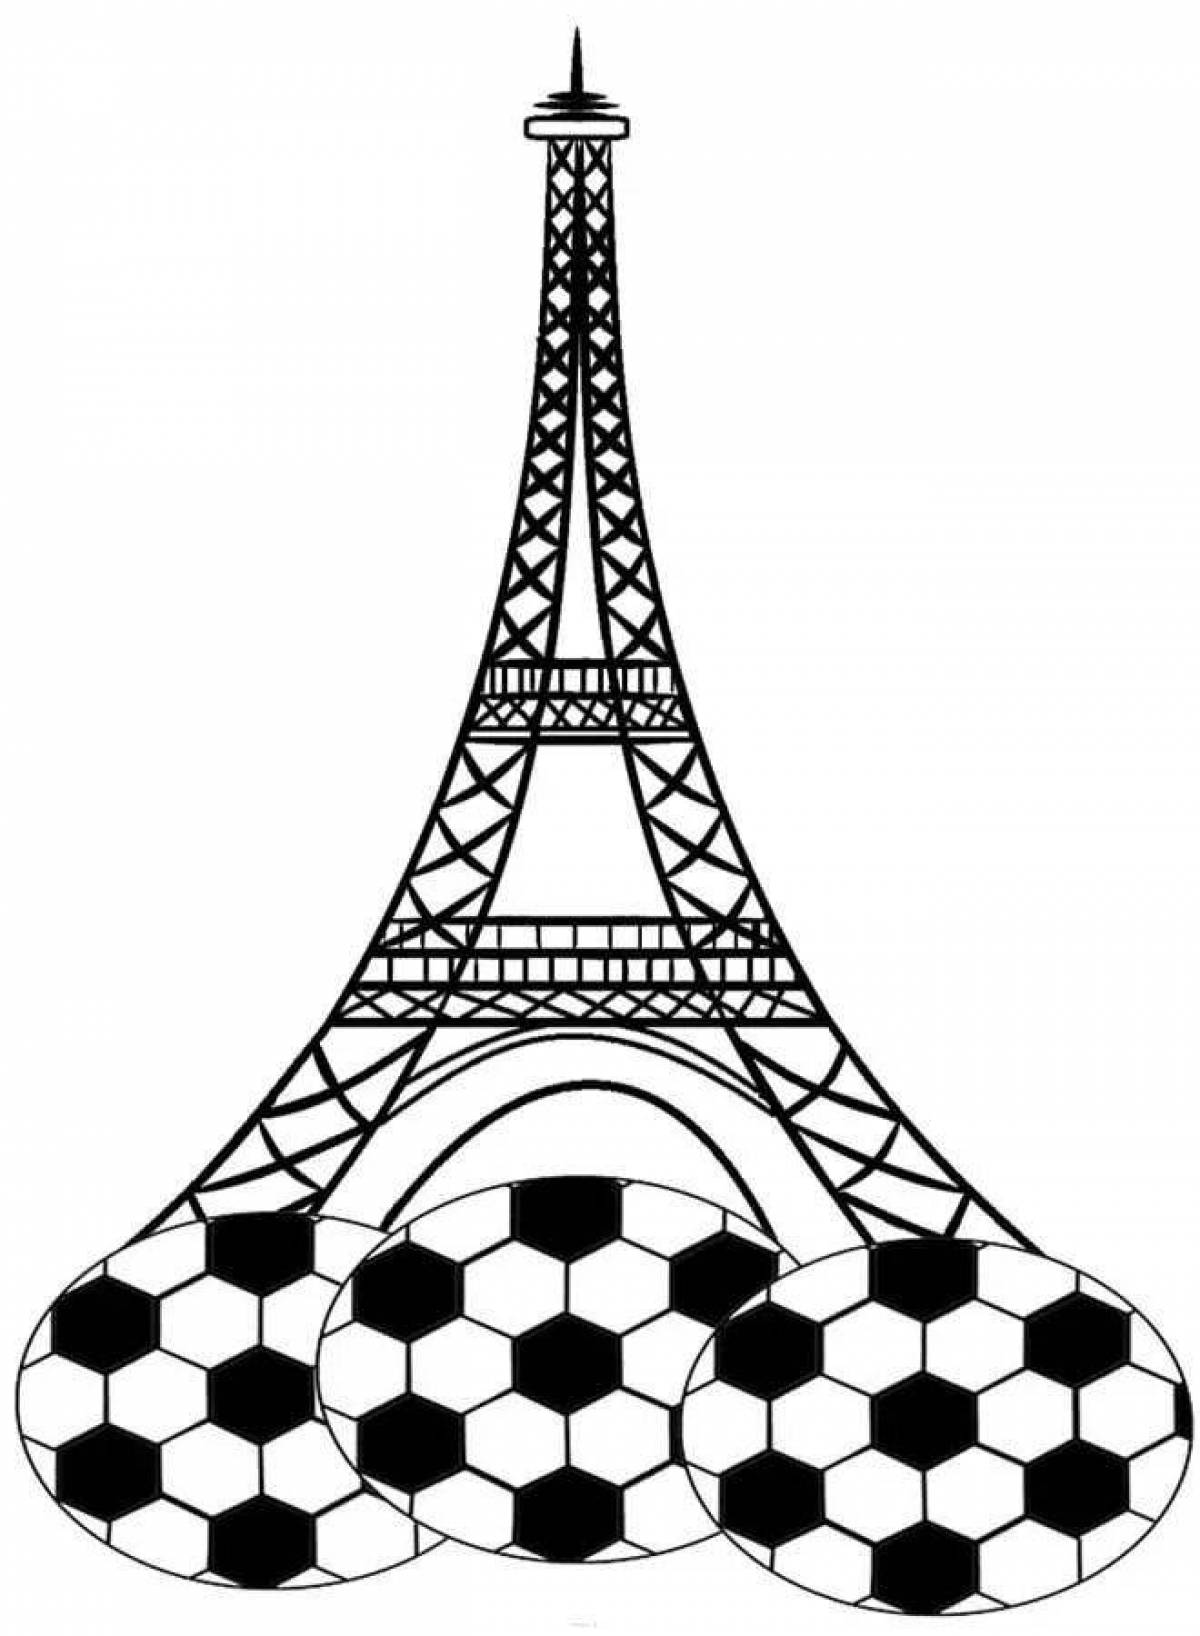 Coloring page majestic eiffel tower